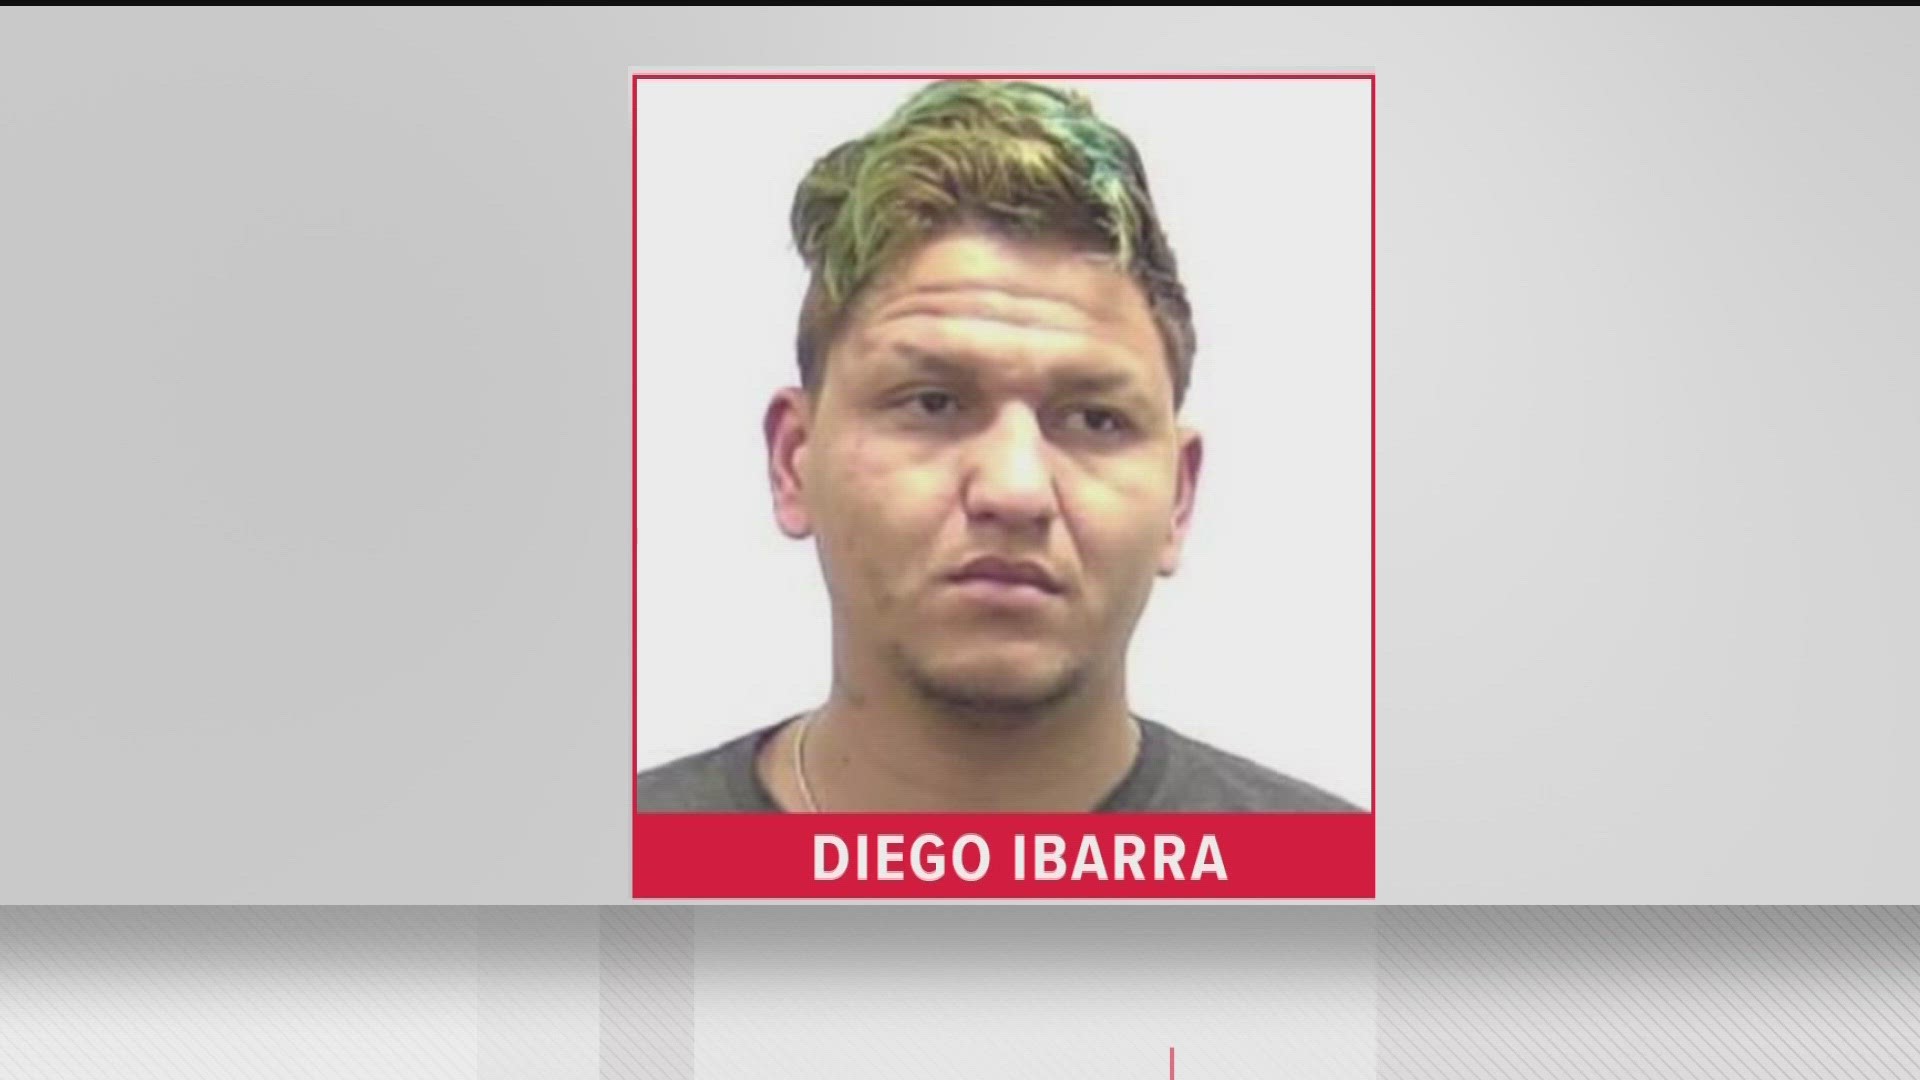 A federal grand jury indicted Diego Ibarra Tuesday.